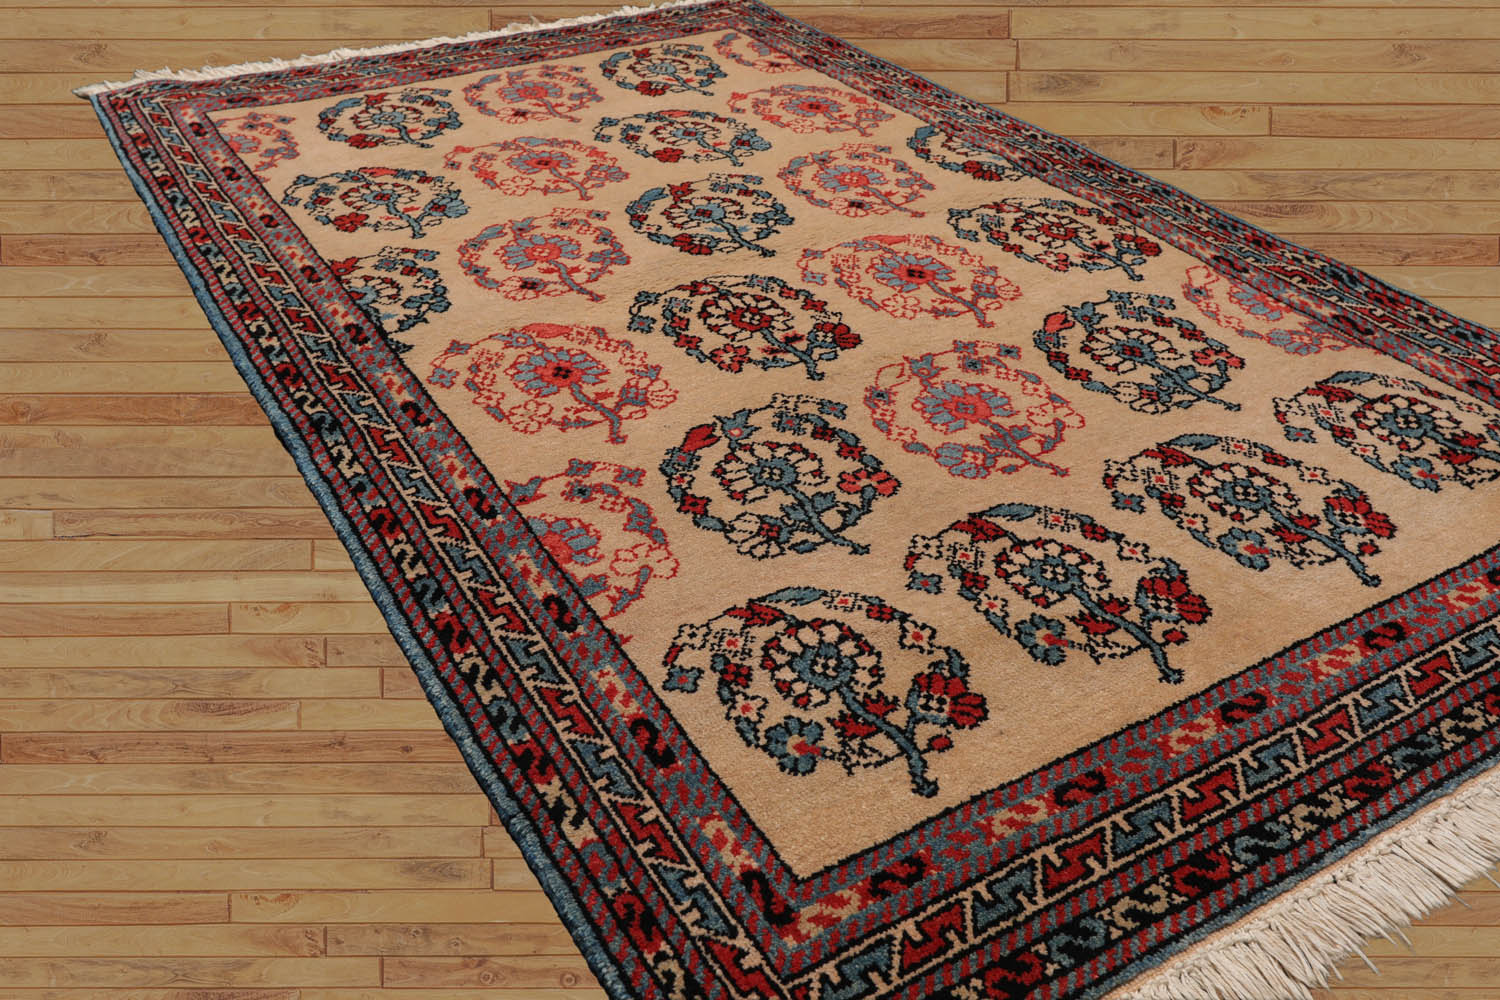 Leshay 3x5 Hand Knotted Tibetan 100% Wool Transitional Oriental Area Rug Beige, Rust Color